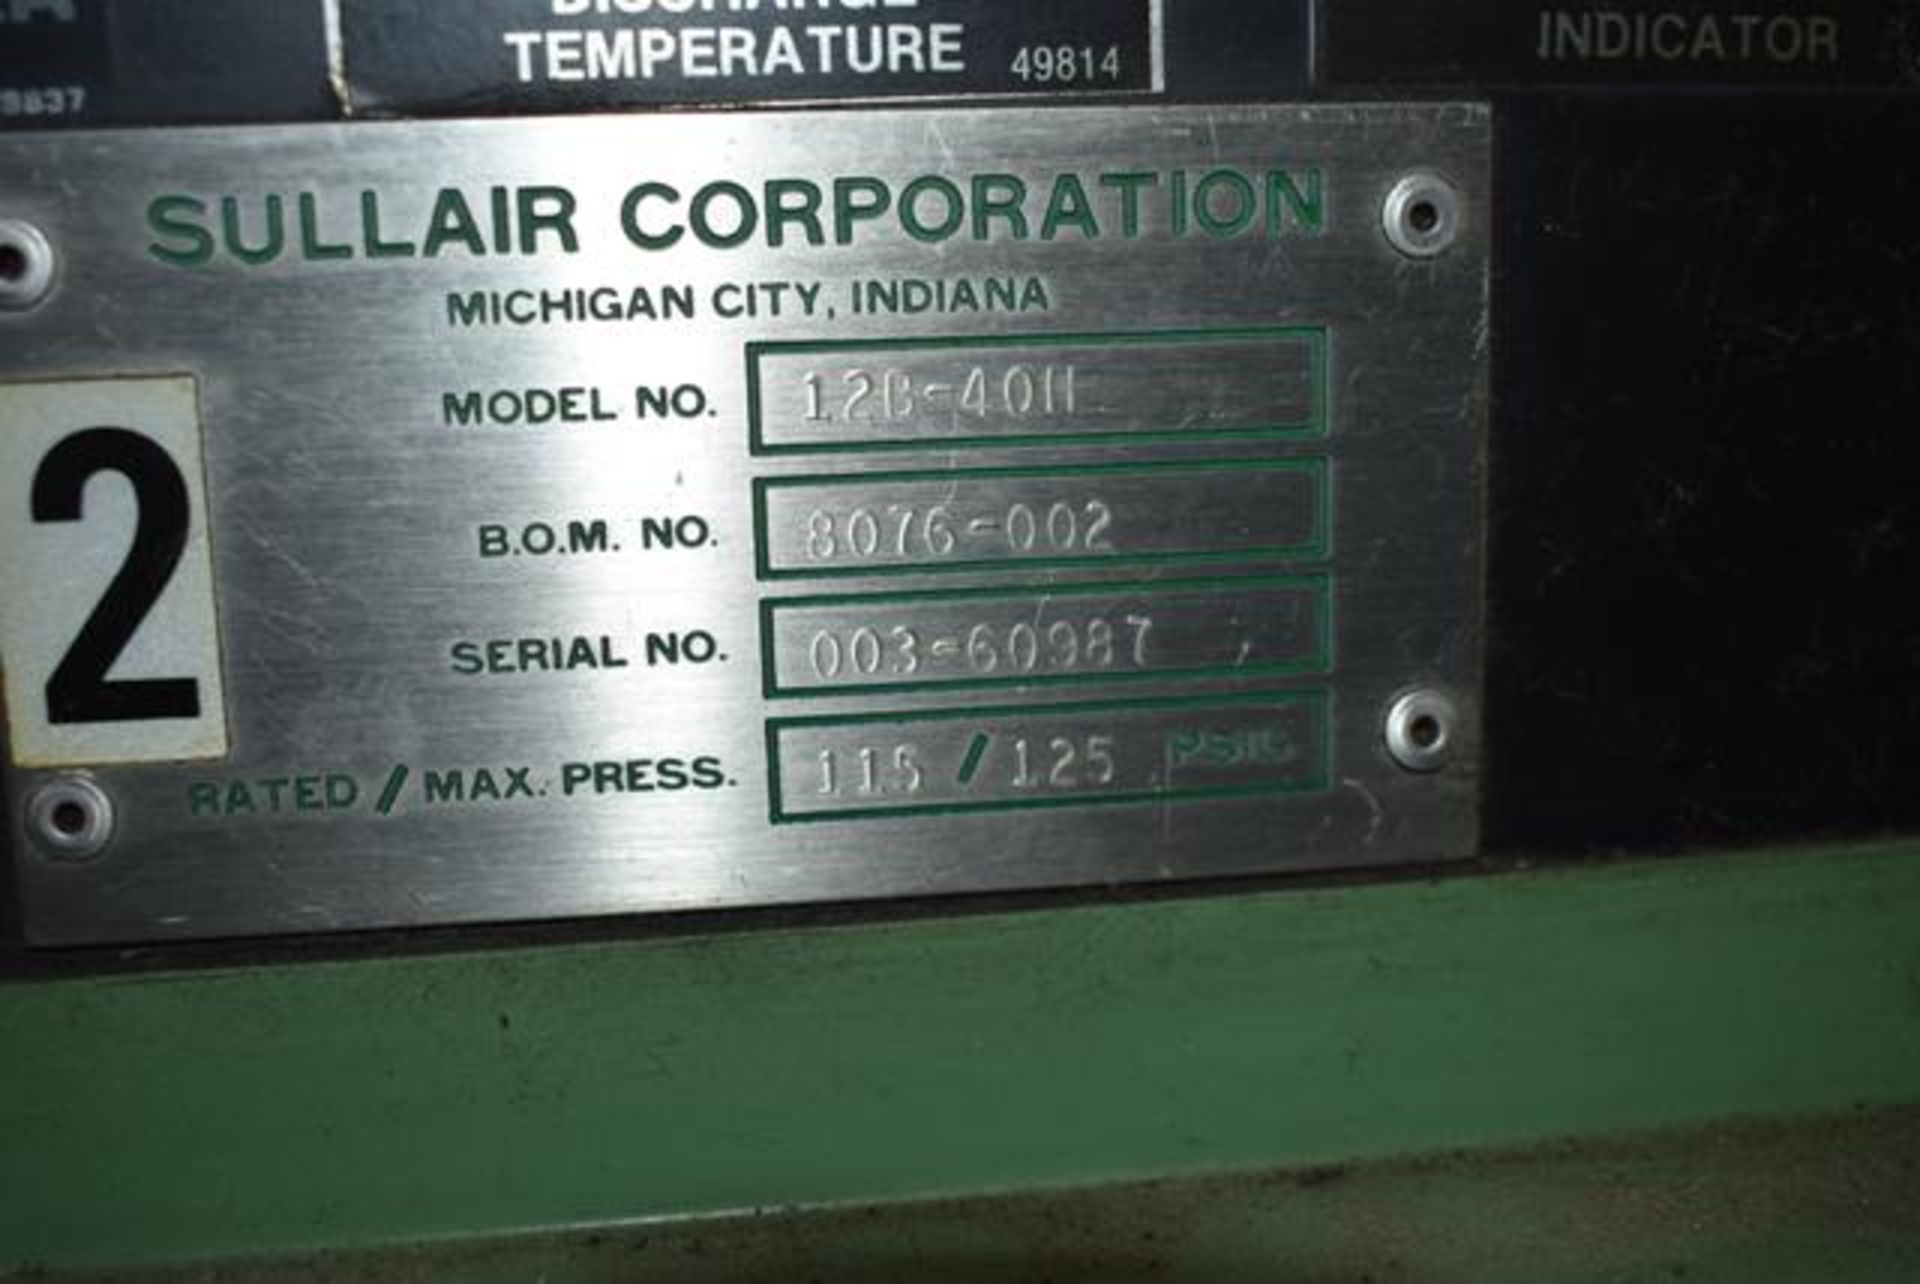 Sullair Model #12B-40H Rotary Screw Air Compressor, 40 HP Motor, 23208 Hrs. Indicated - Image 3 of 3